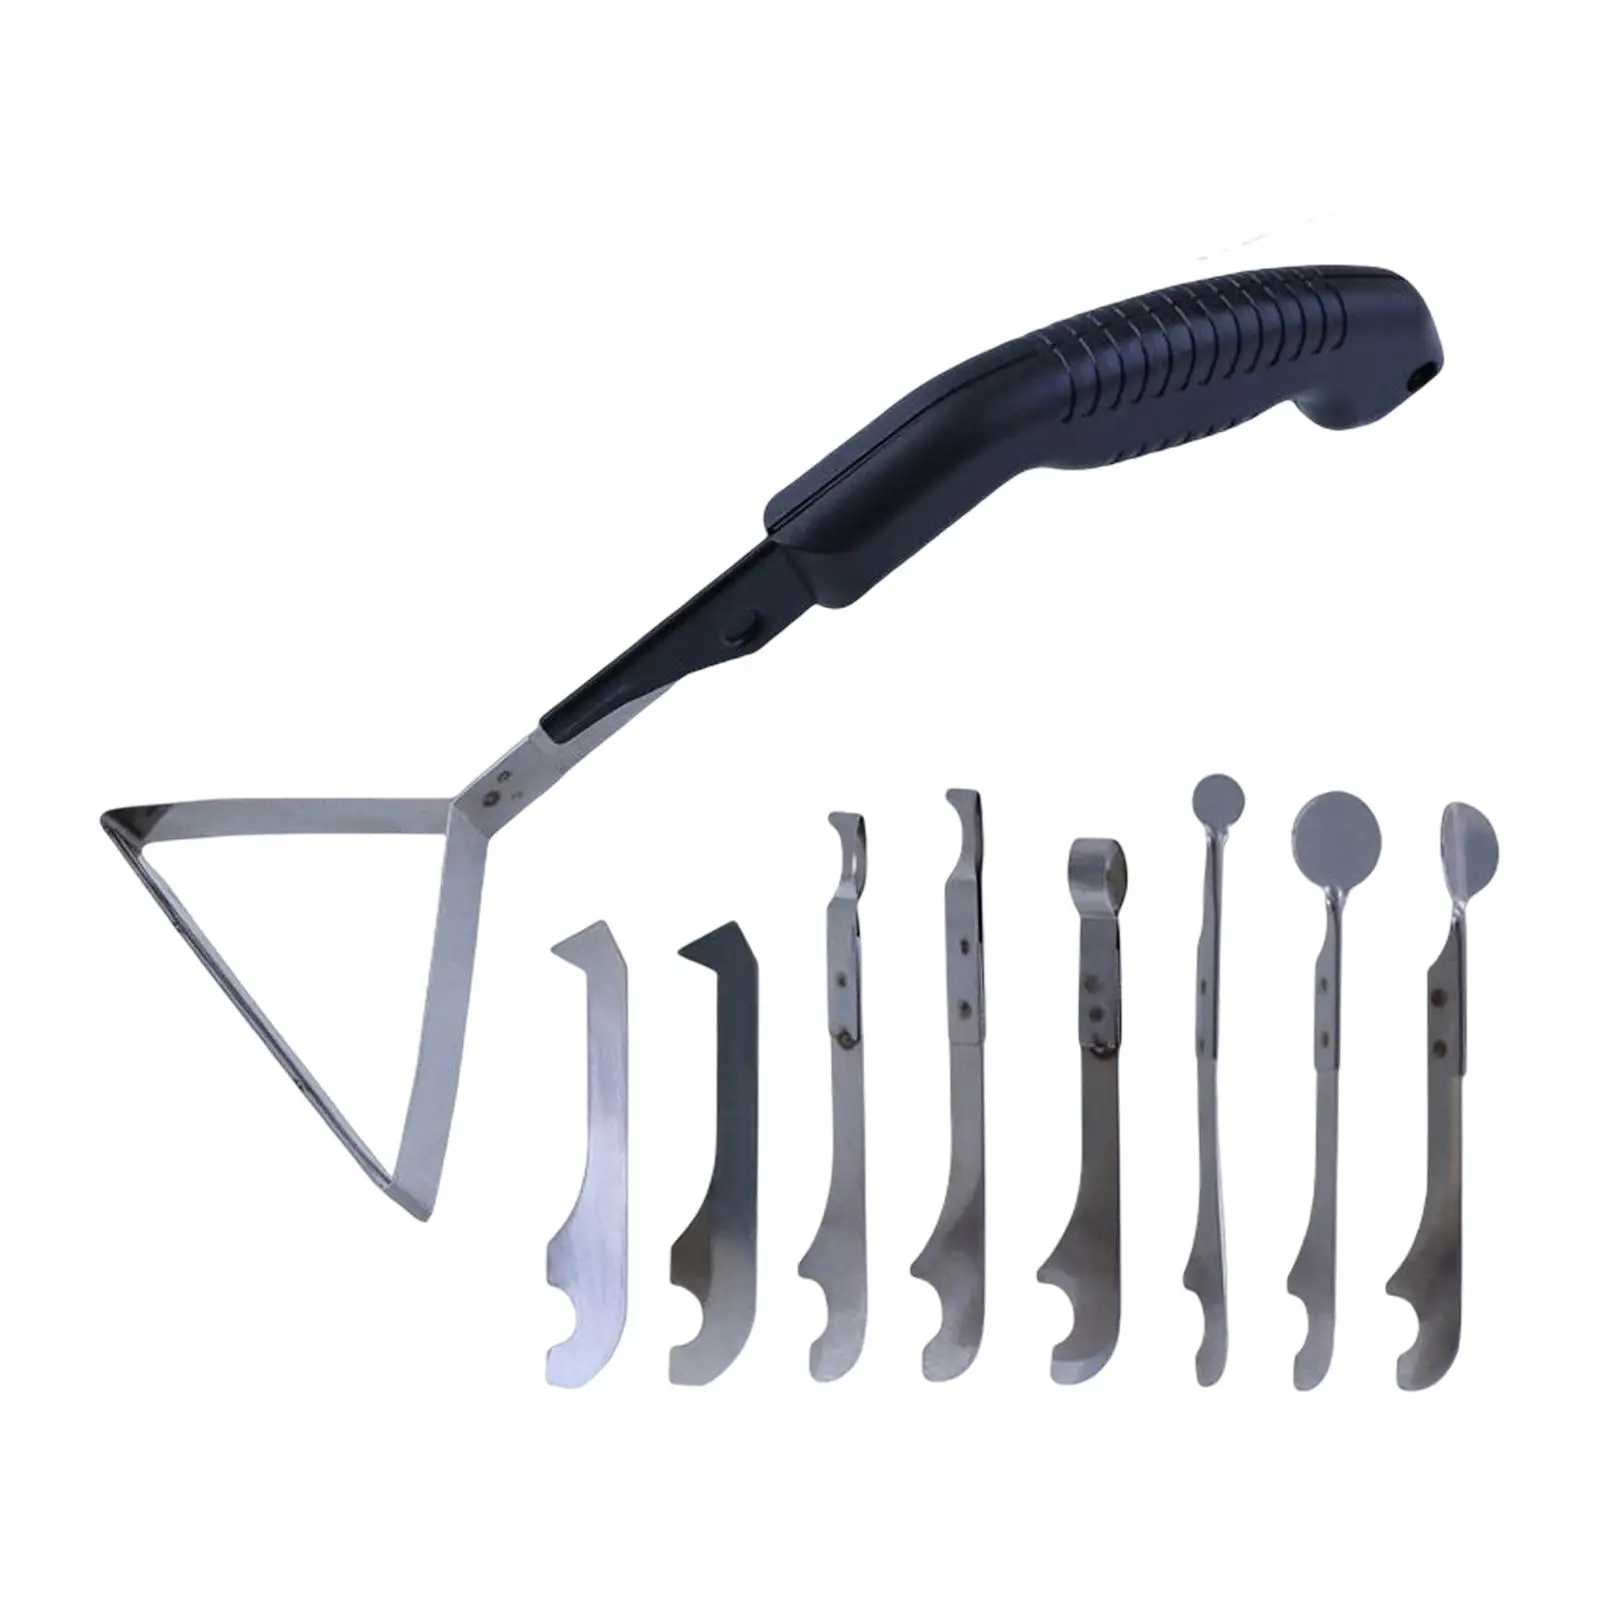 10Pcs Grout Removal Tool Tile Gap Repair Tool Cleaning Dust Removal Caulking Tool Kit for Living Room Bathroom Kitchen Floor